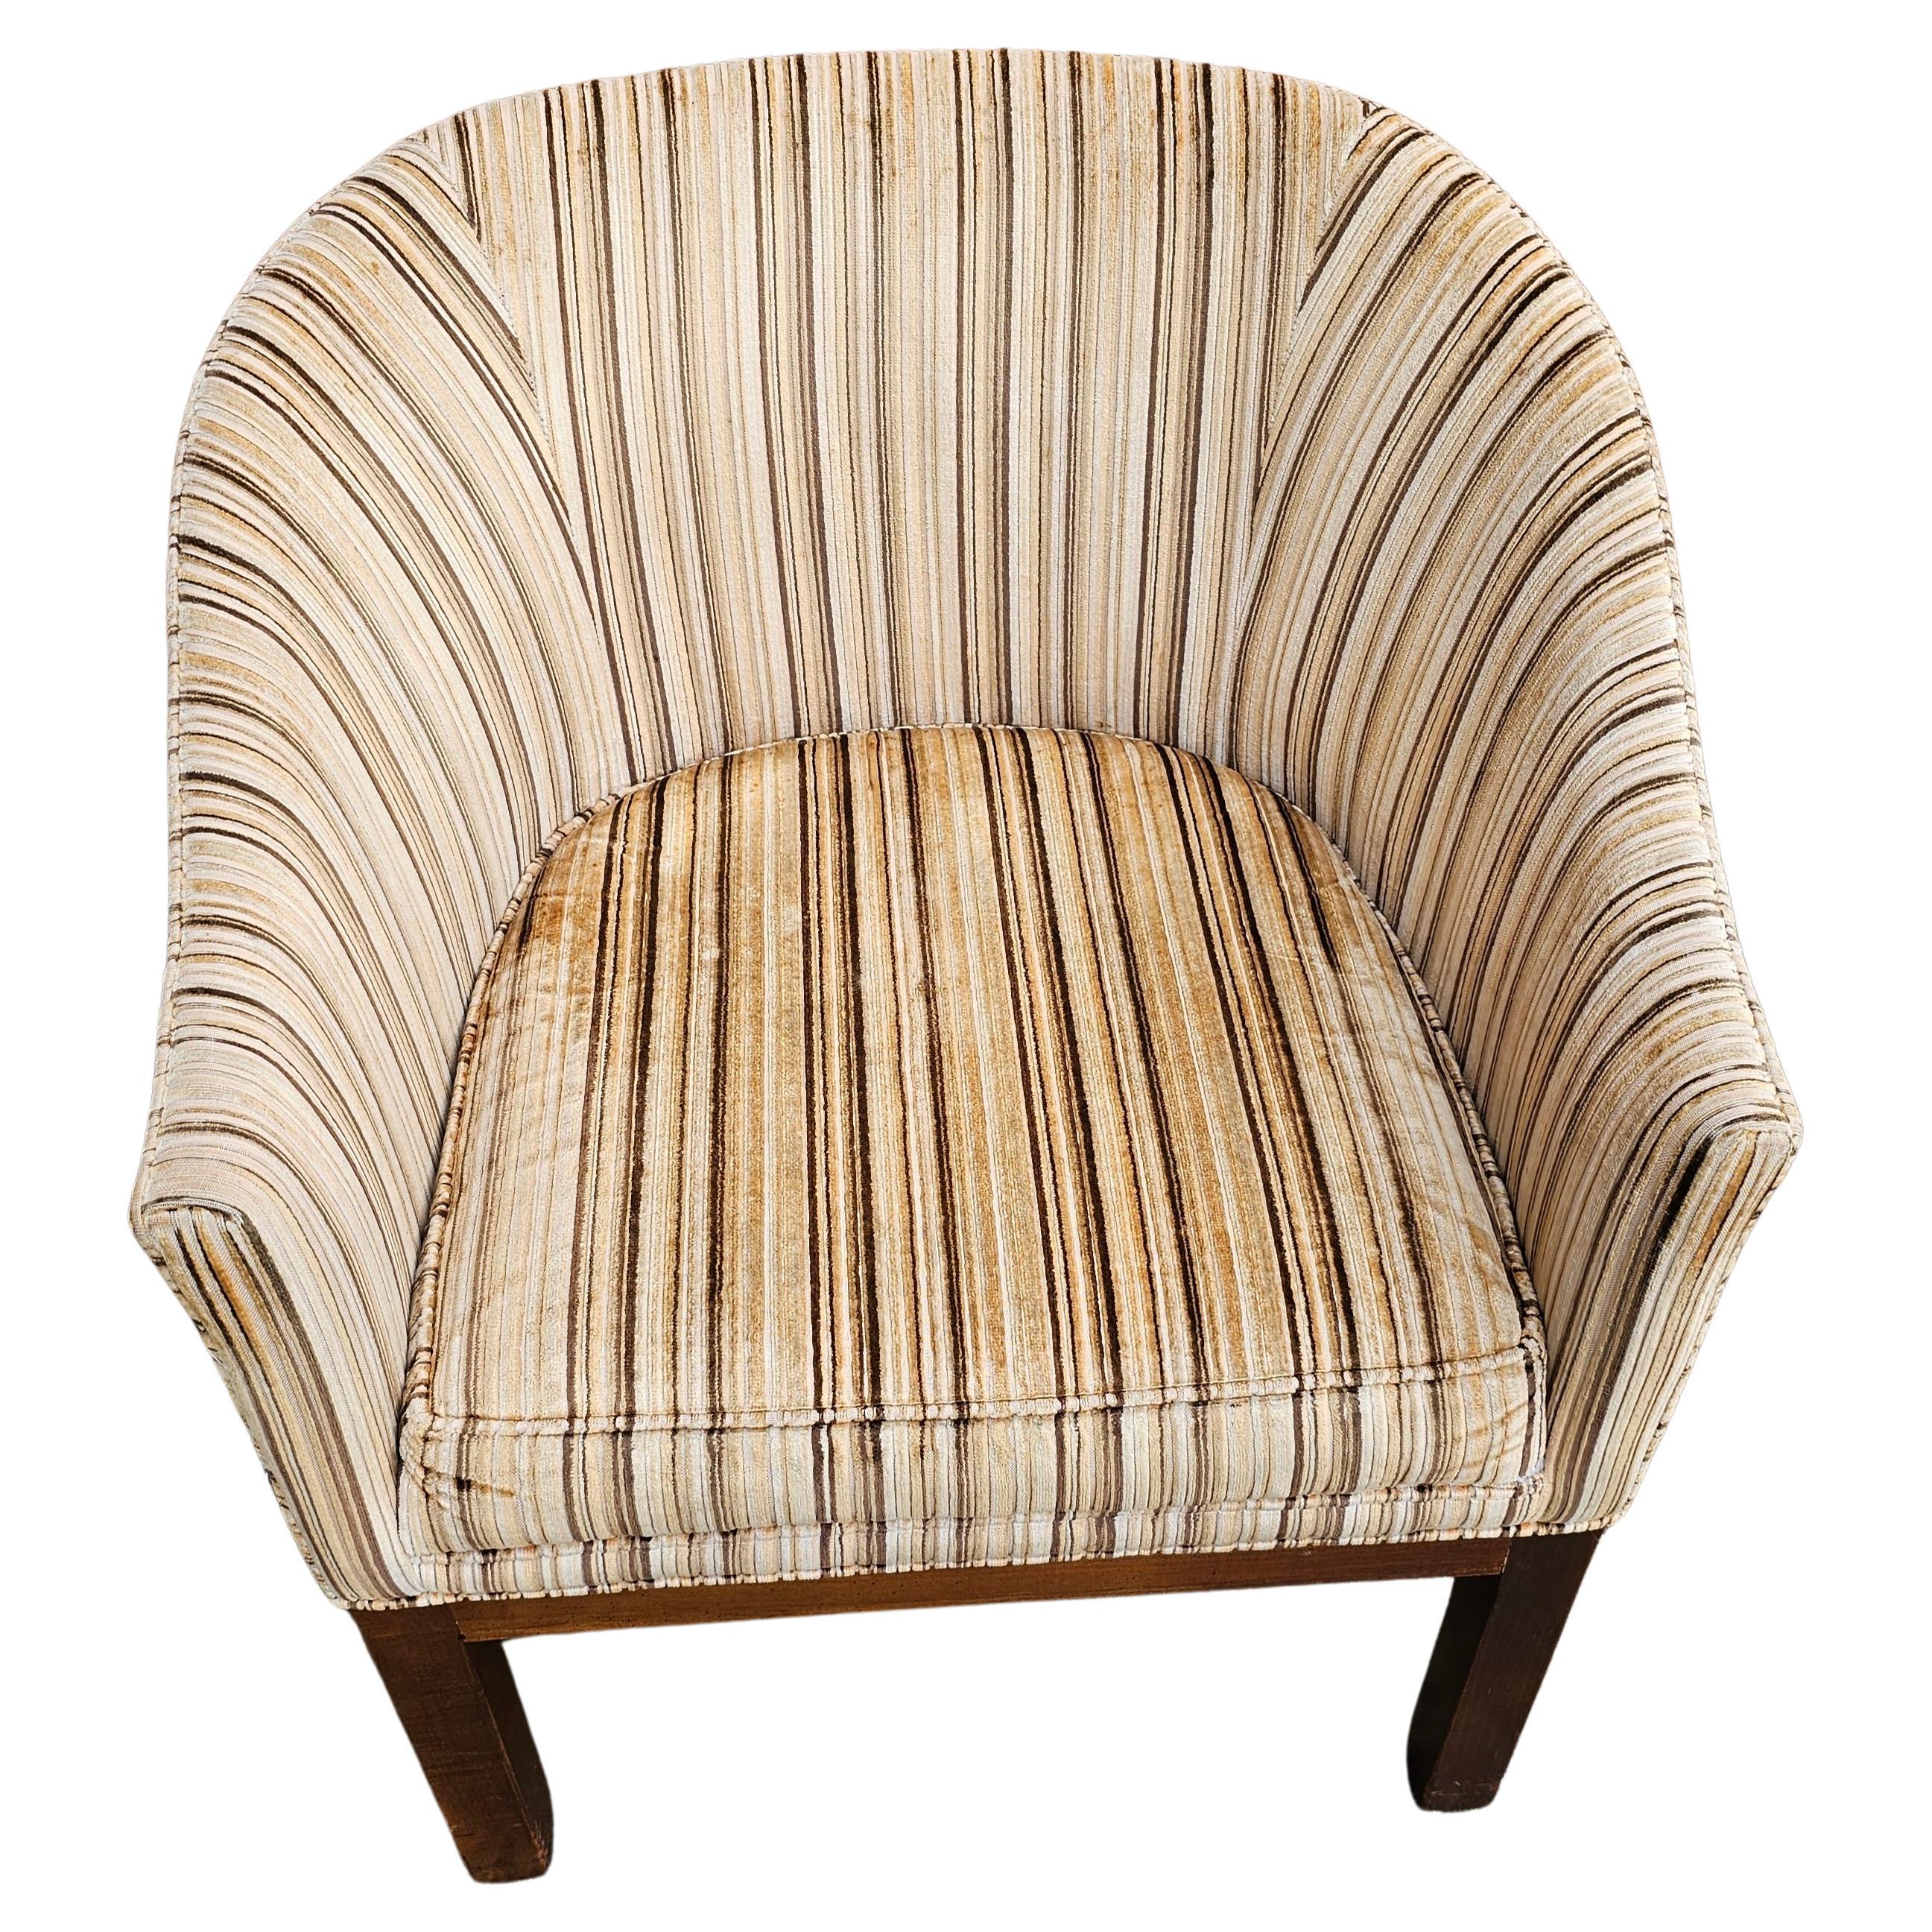 A late 20th Century Mahogany and Stripped Velvet Upholstered Barrel Back Club Chair. Measures 24.5